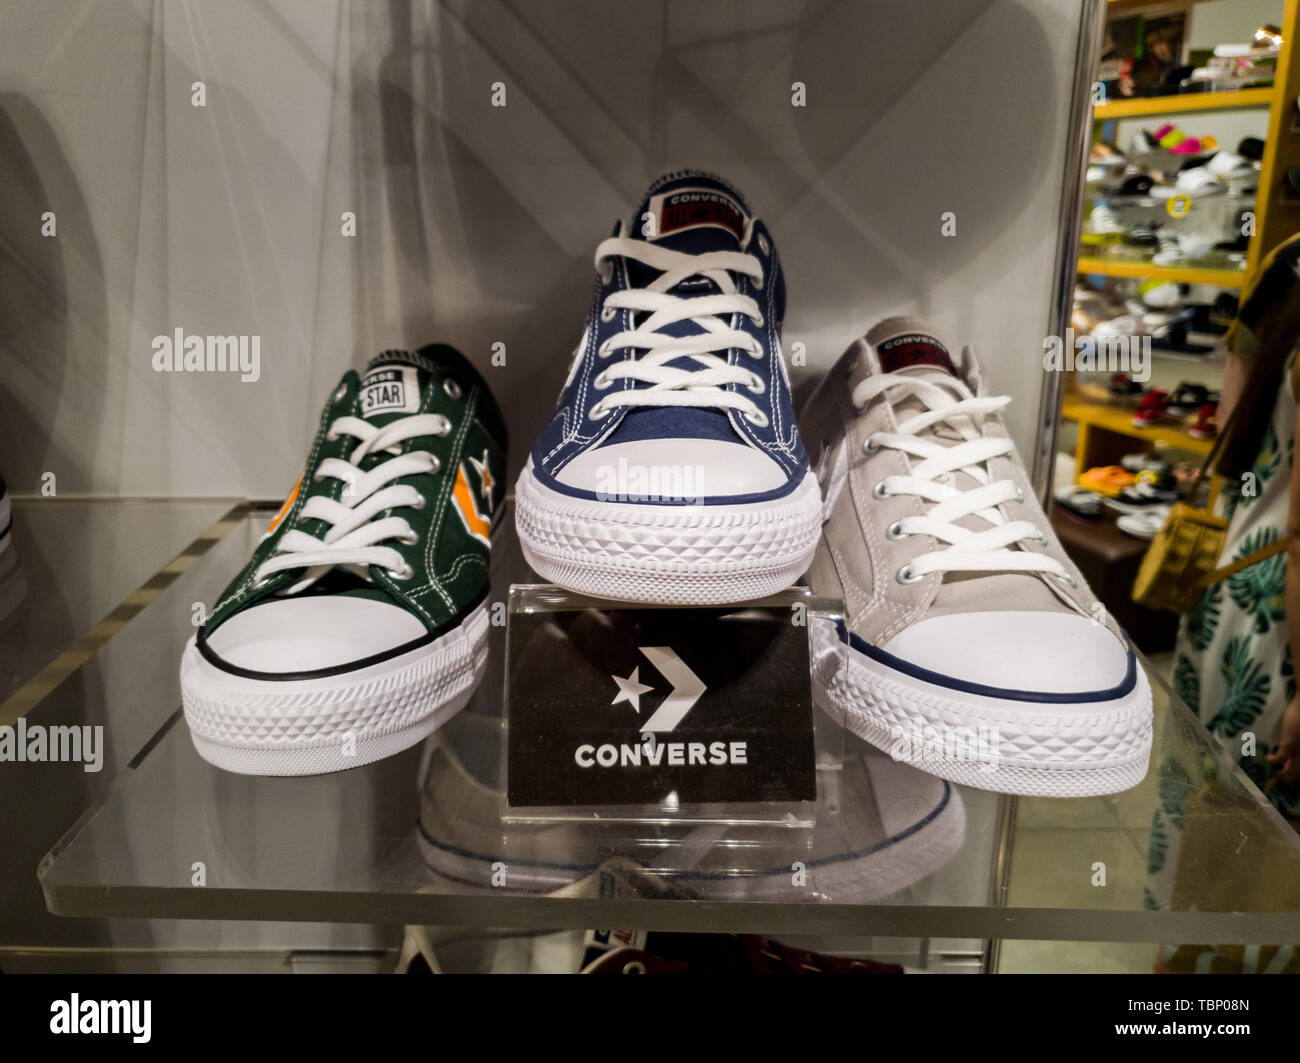 converse trainers uk